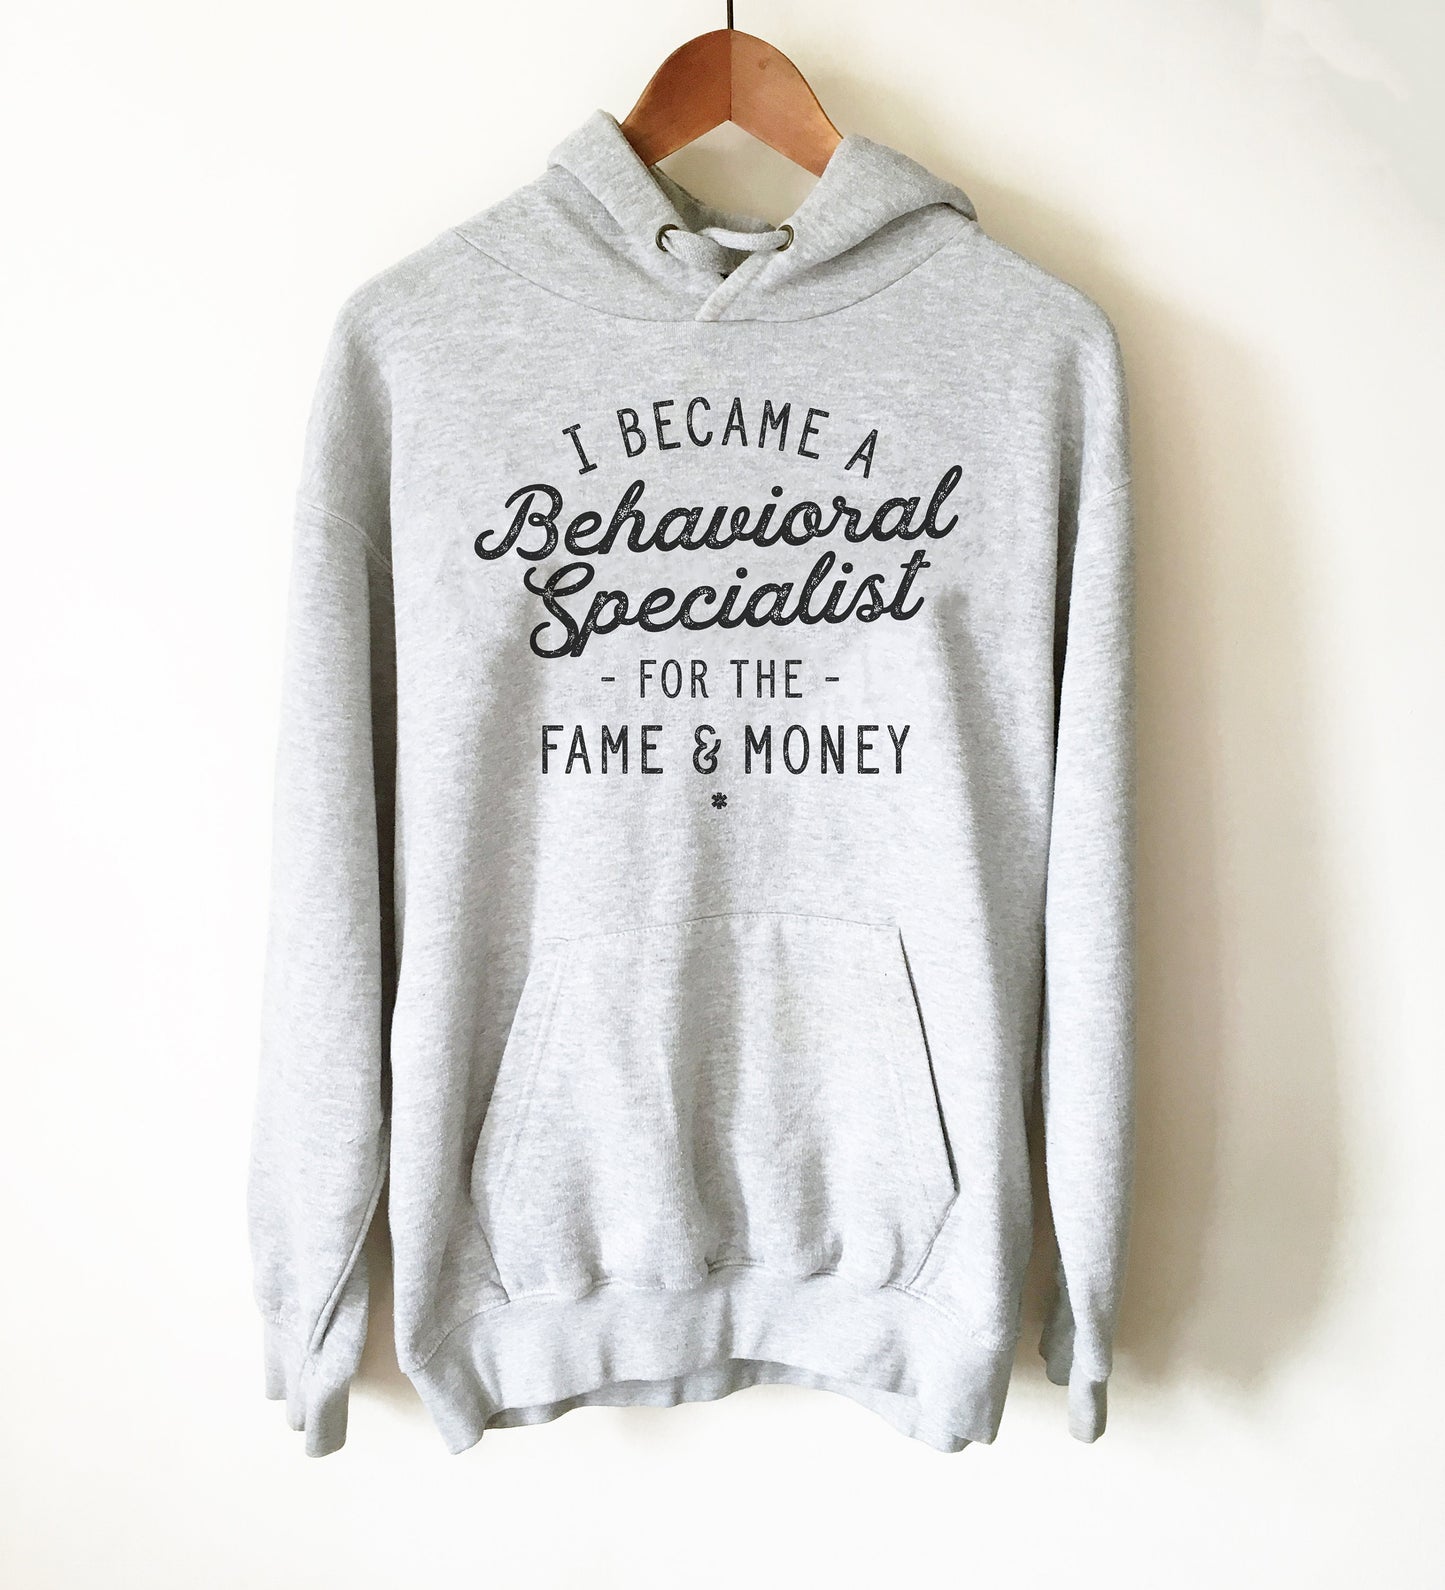 I Became A Behavioural Specialist For The Fame & Money Hoodie - Behavioral Specialist Shirt, Behavioral Therapist Shirt